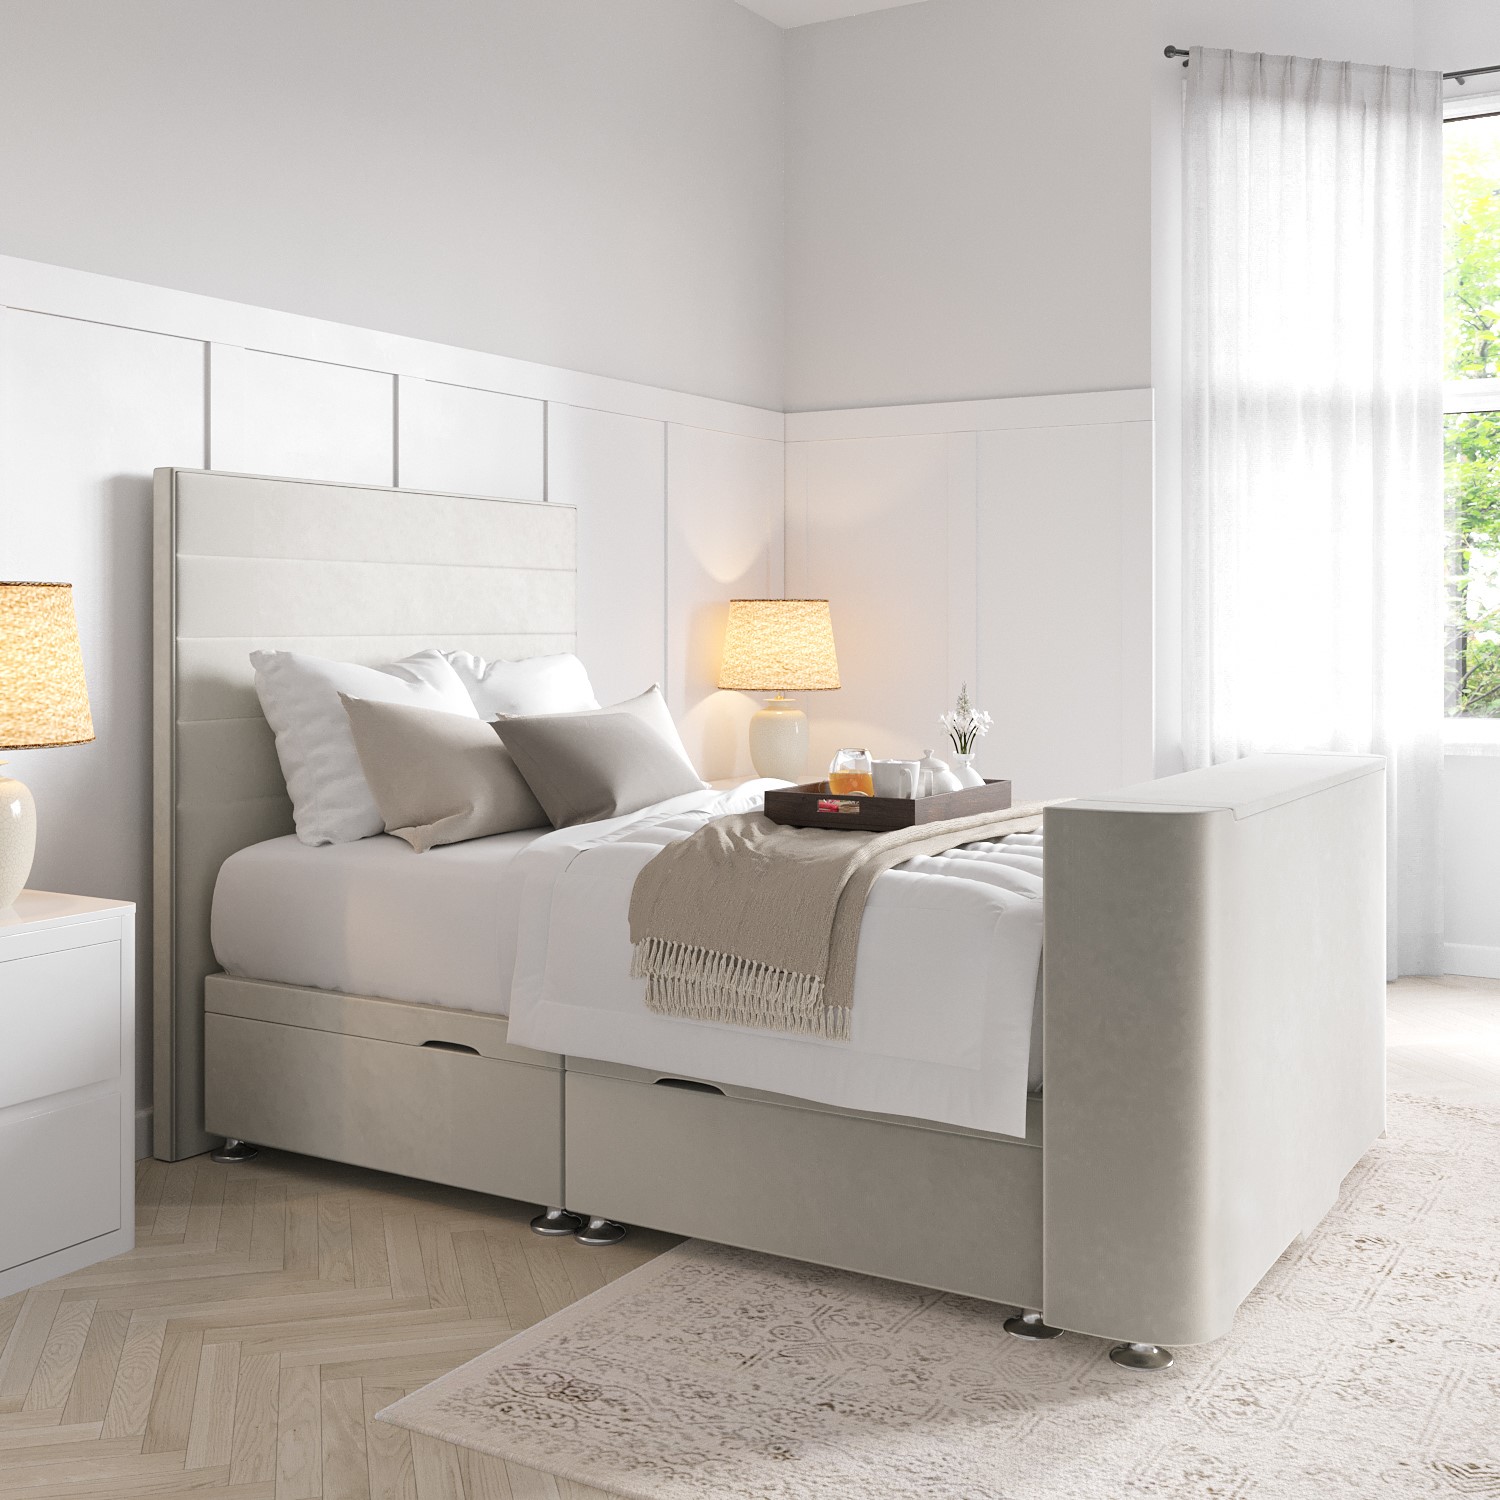 Read more about Double tv ottoman bed in cream velvet with stripe headboard eden